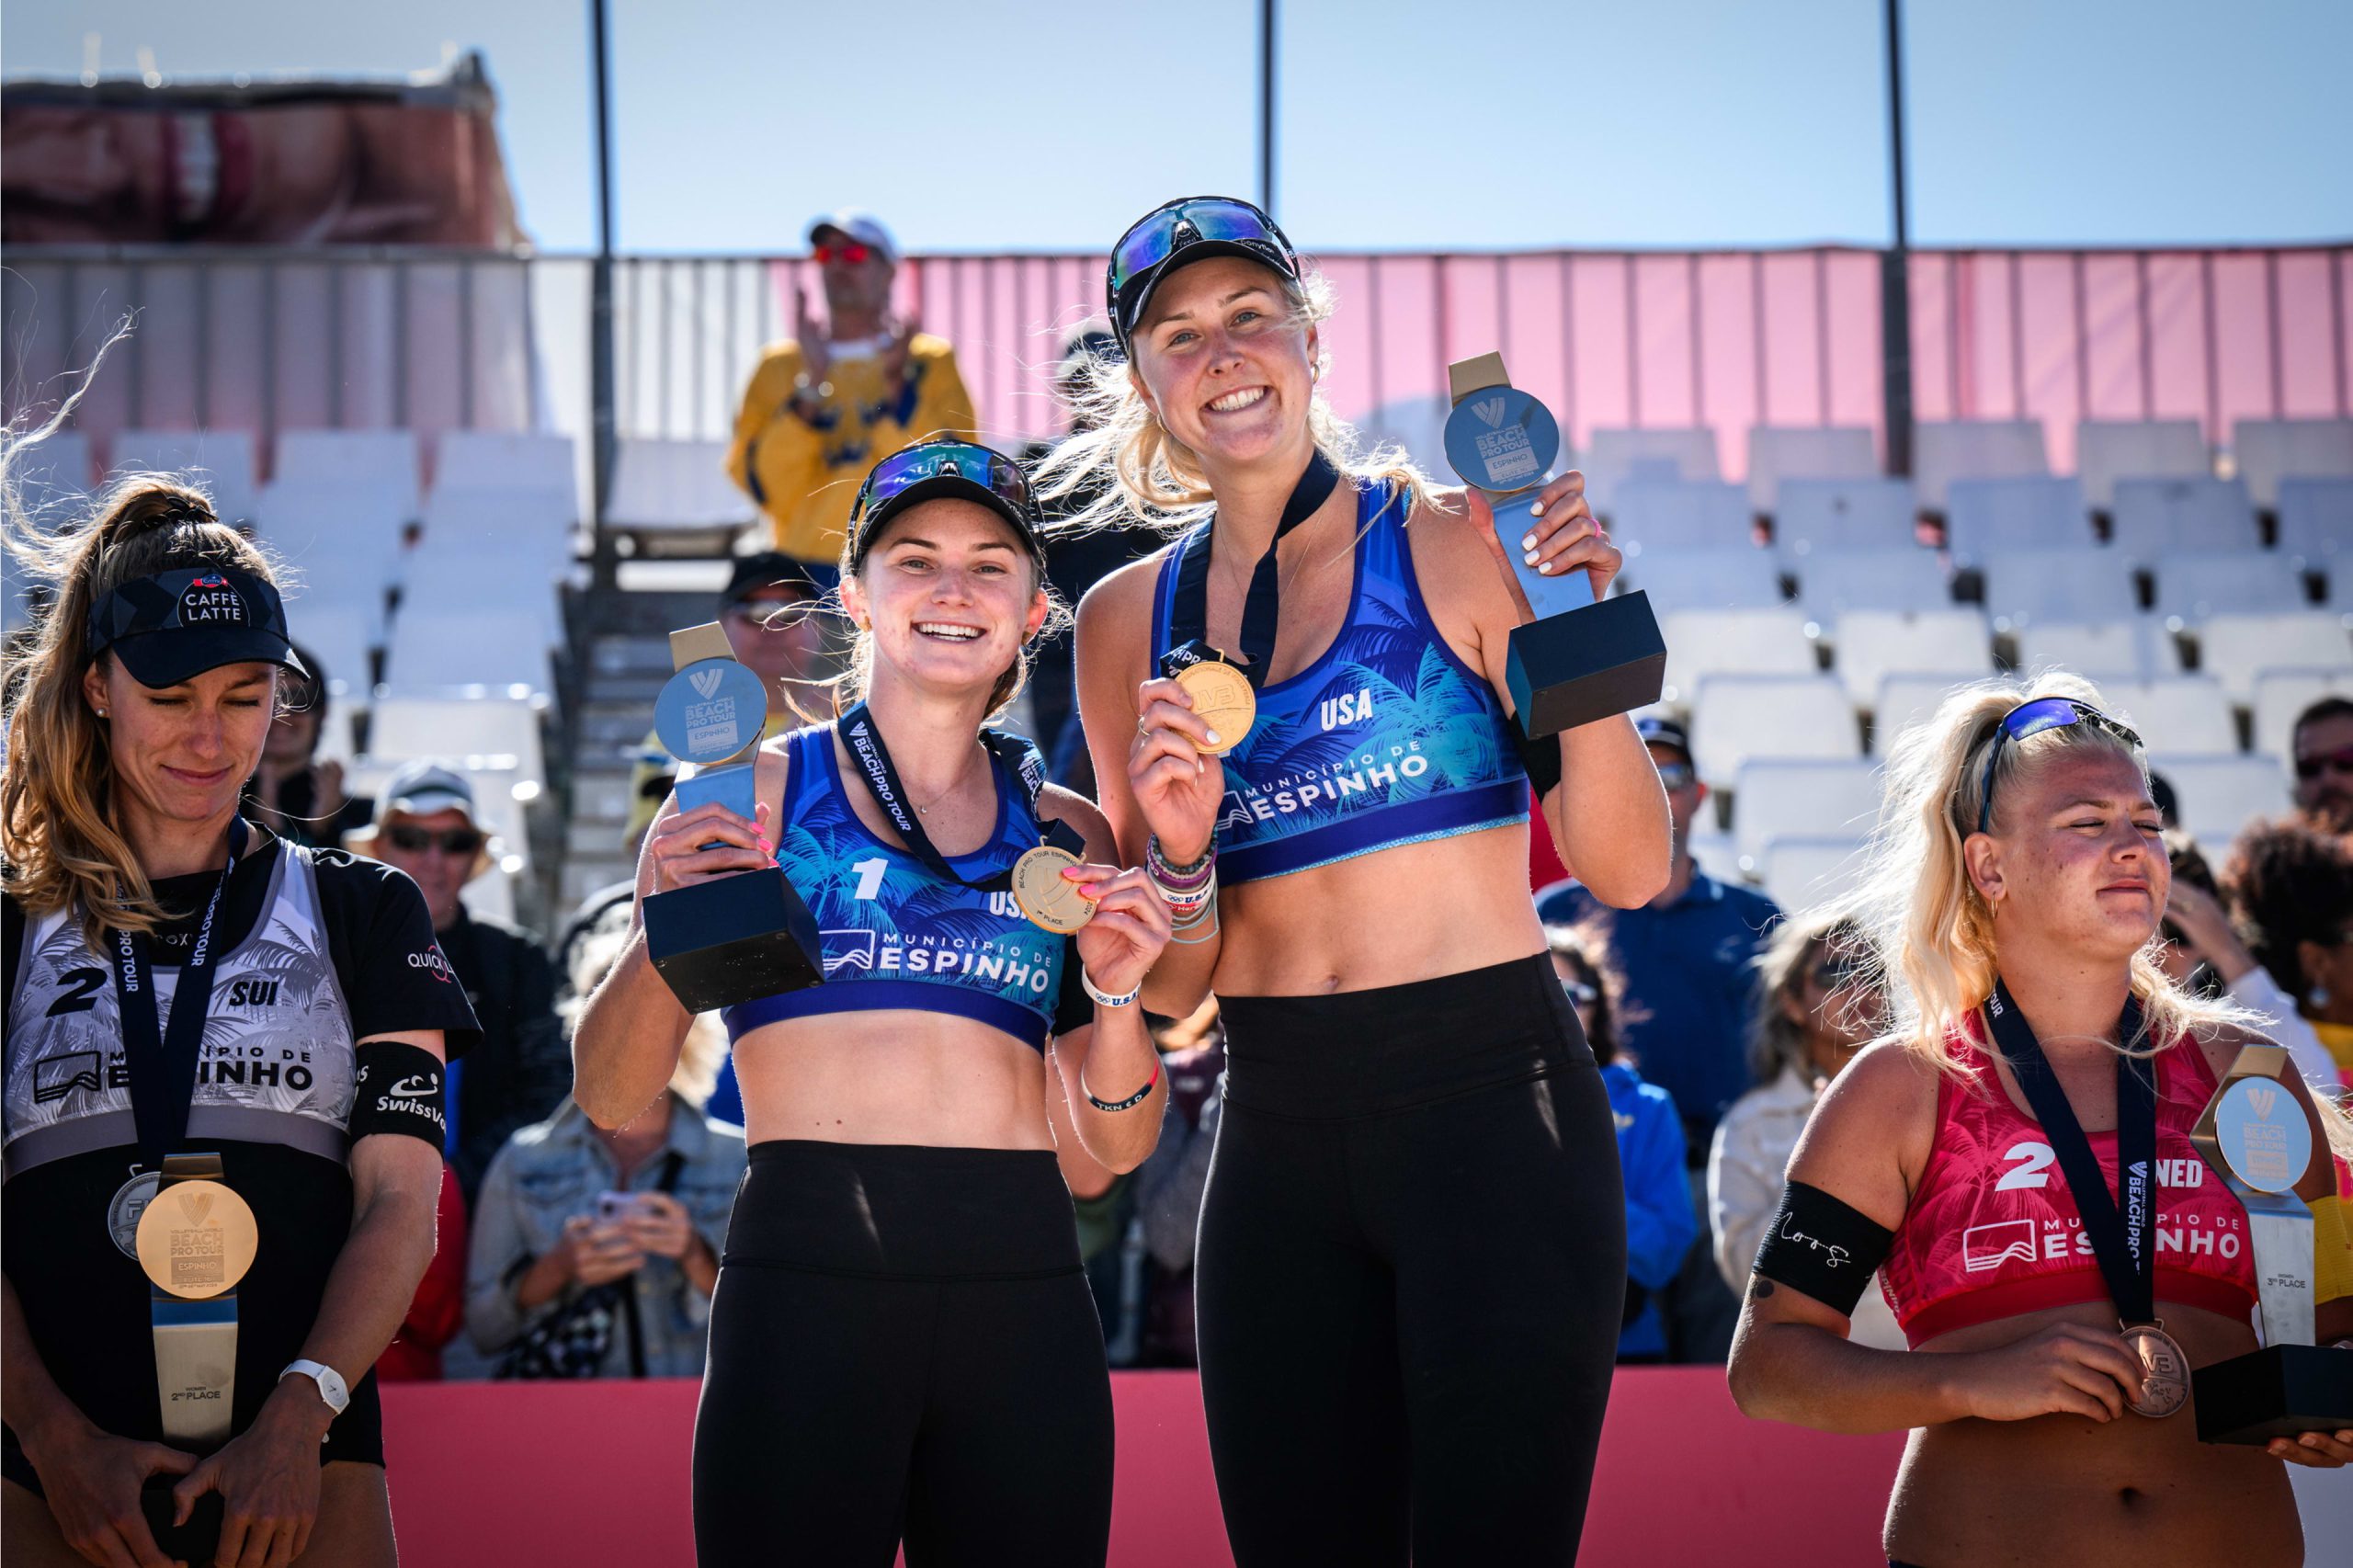 USA’s Kloth/Nuss secure Espinho Gold two months before Paris